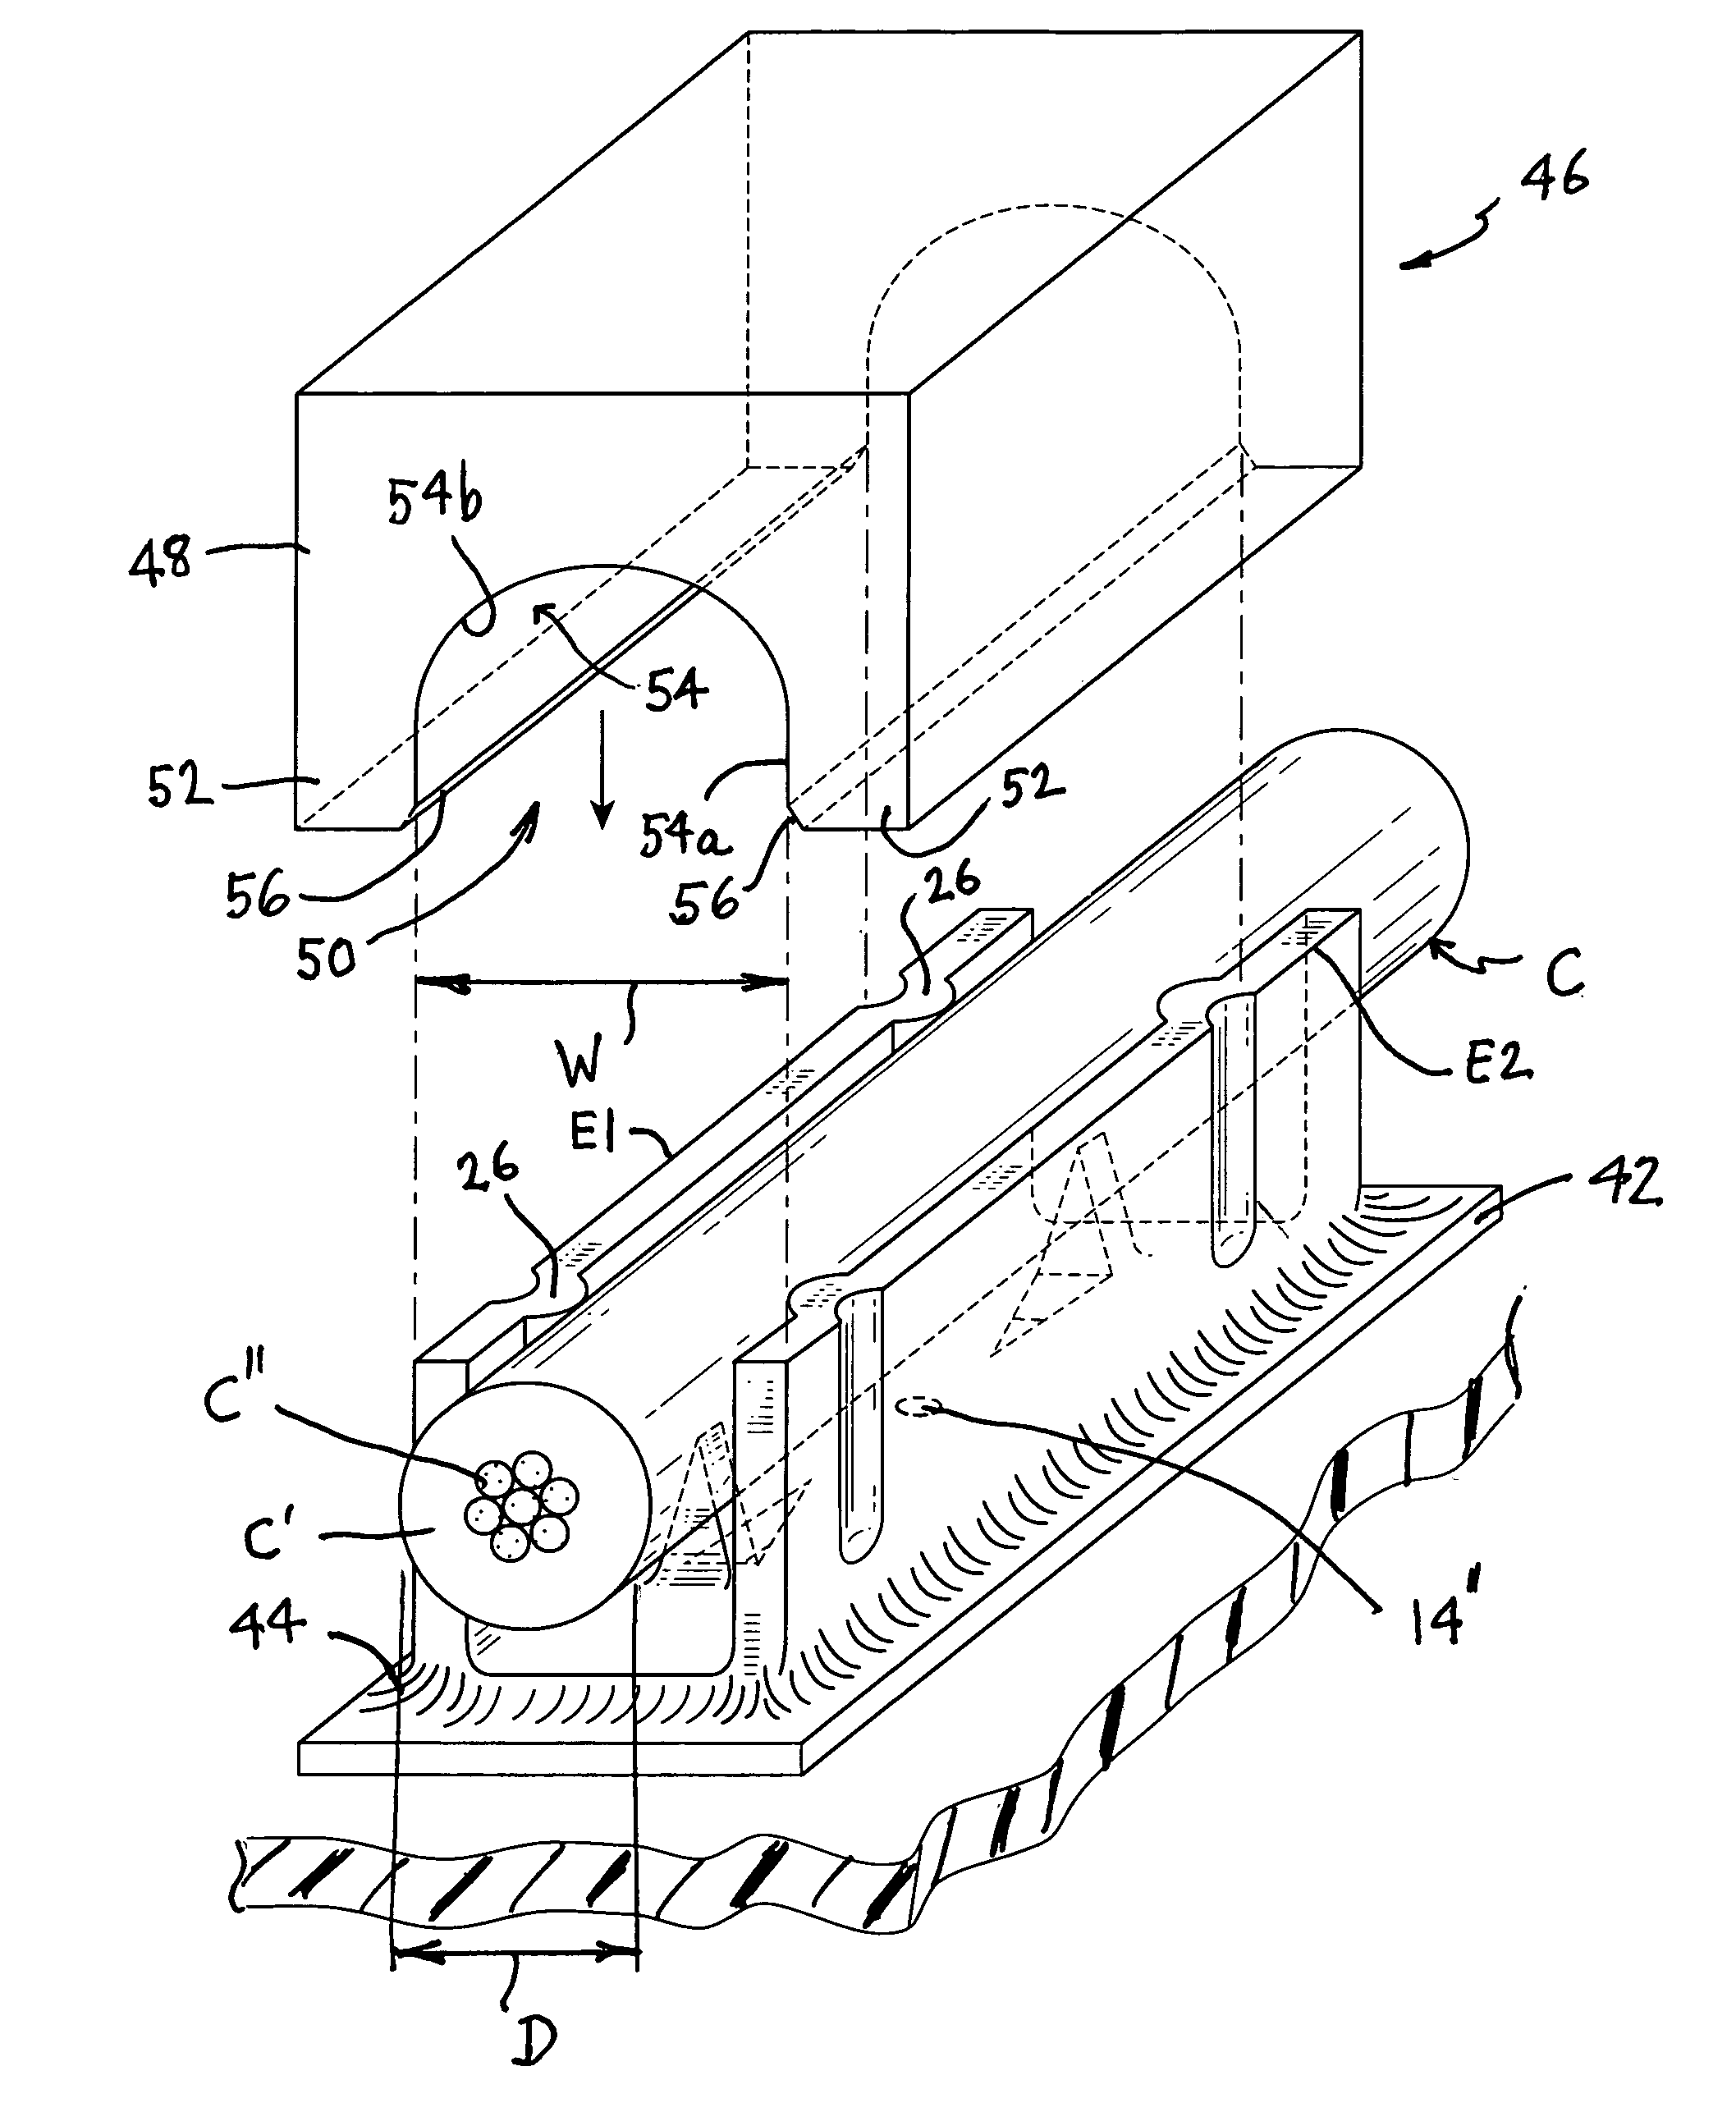 Surface mount crimp terminal and method of crimping an insulated conductor therein